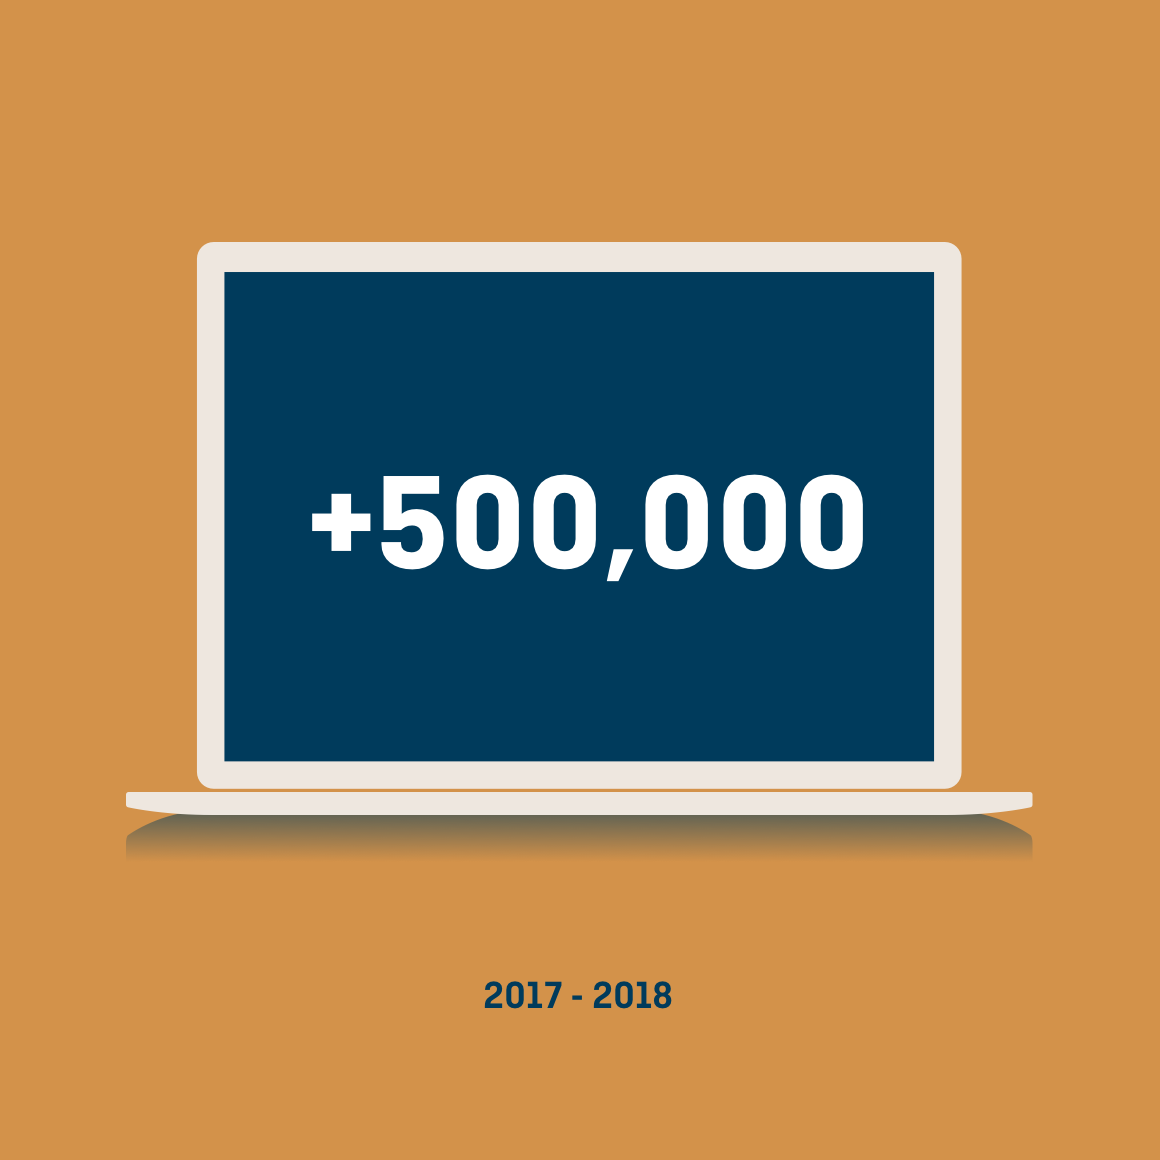 Laptop graphic showing a results impression increase of 500,000 from 2017-2018